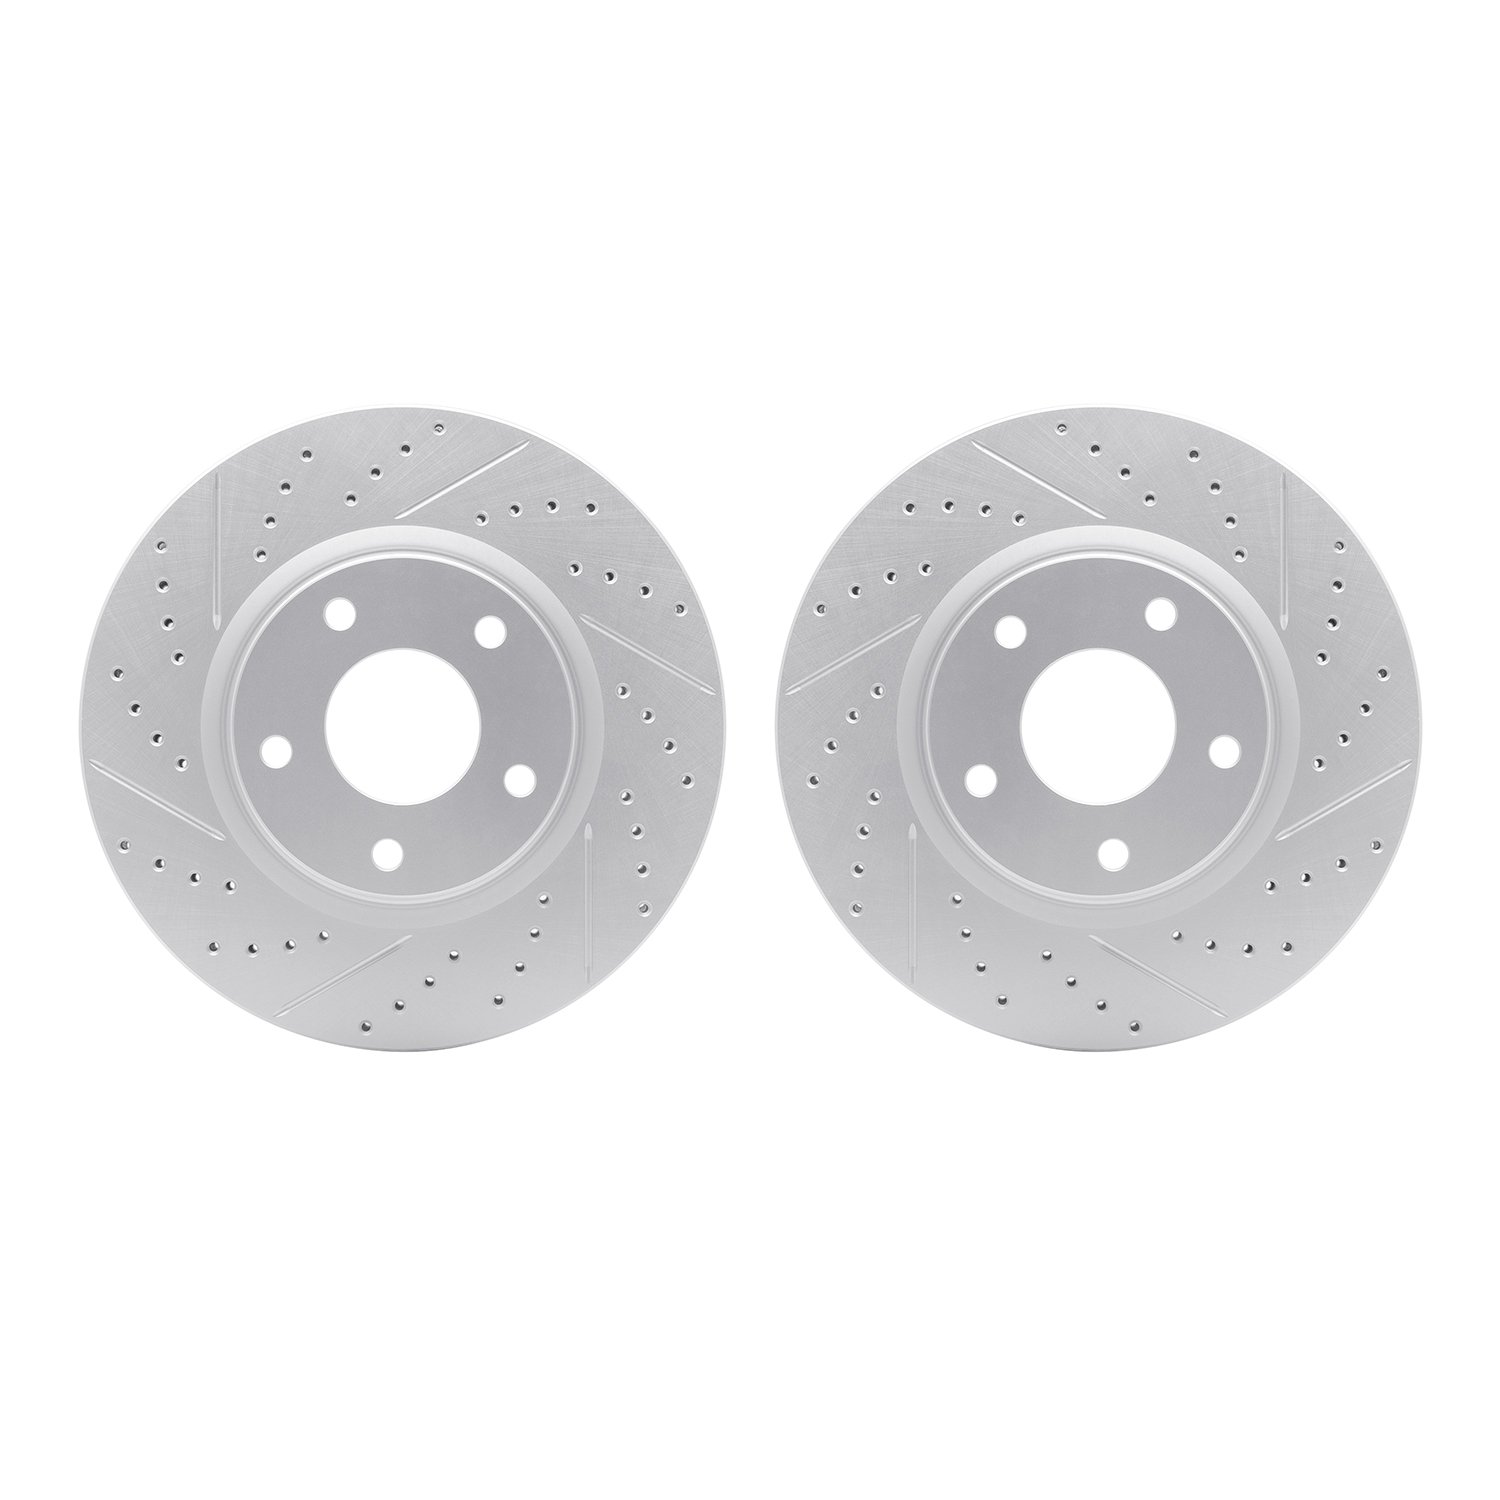 2002-68002 Geoperformance Drilled/Slotted Brake Rotors, 2003-2005 Infiniti/Nissan, Position: Front